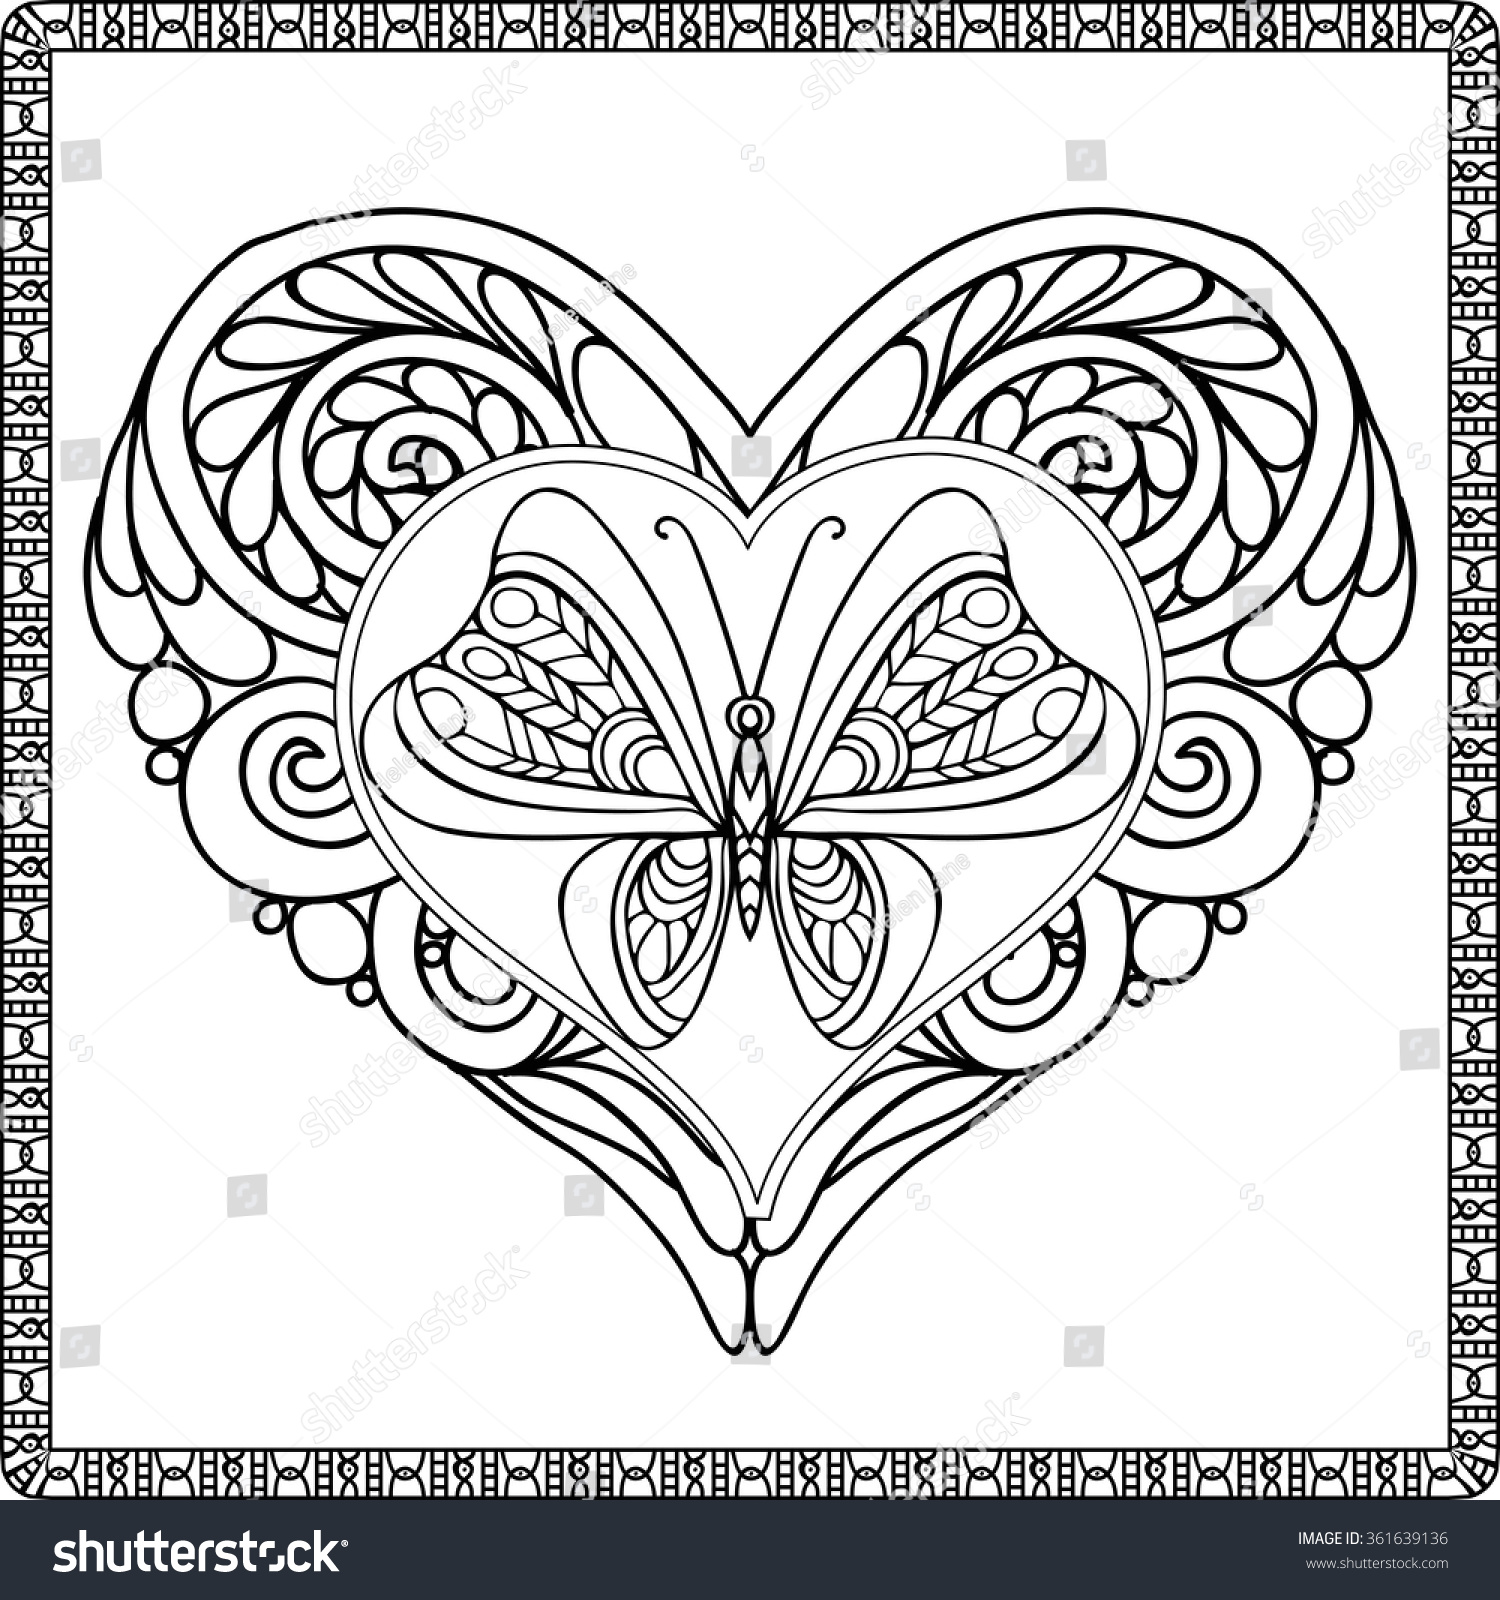 Love Heart Butterfly Coloring Book Adult Stock Vector 361639136